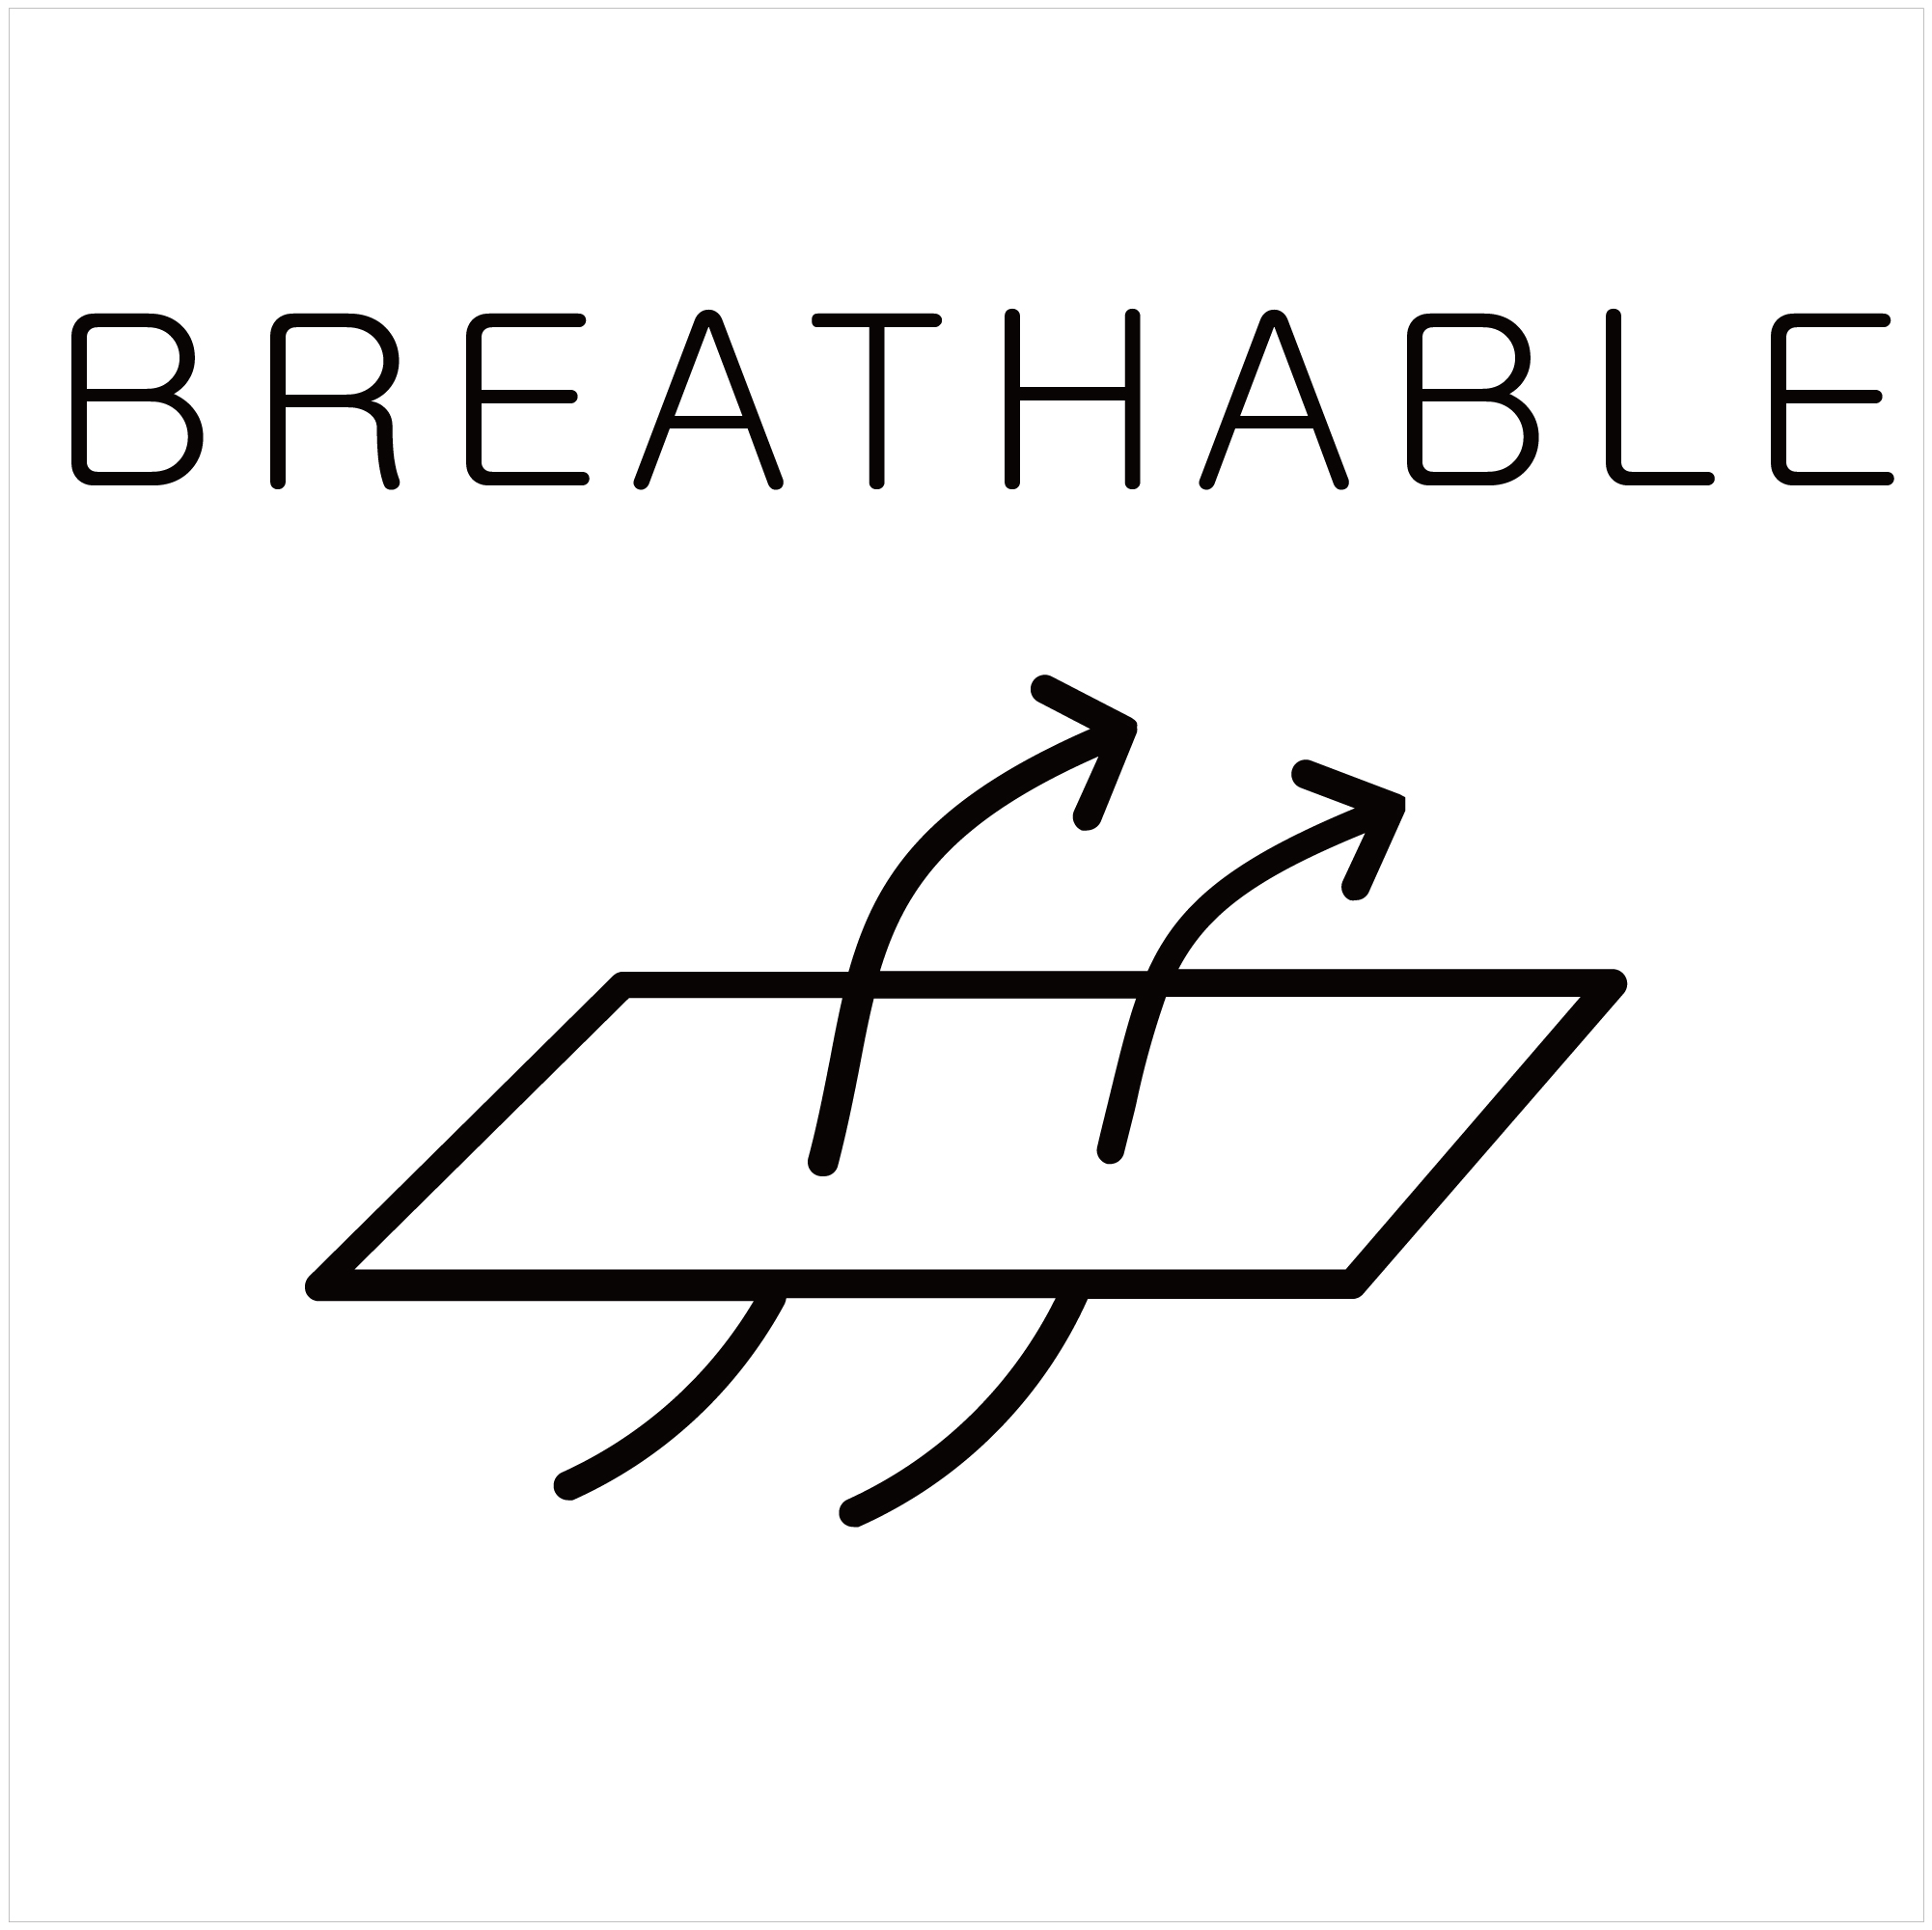 BREATHABLE